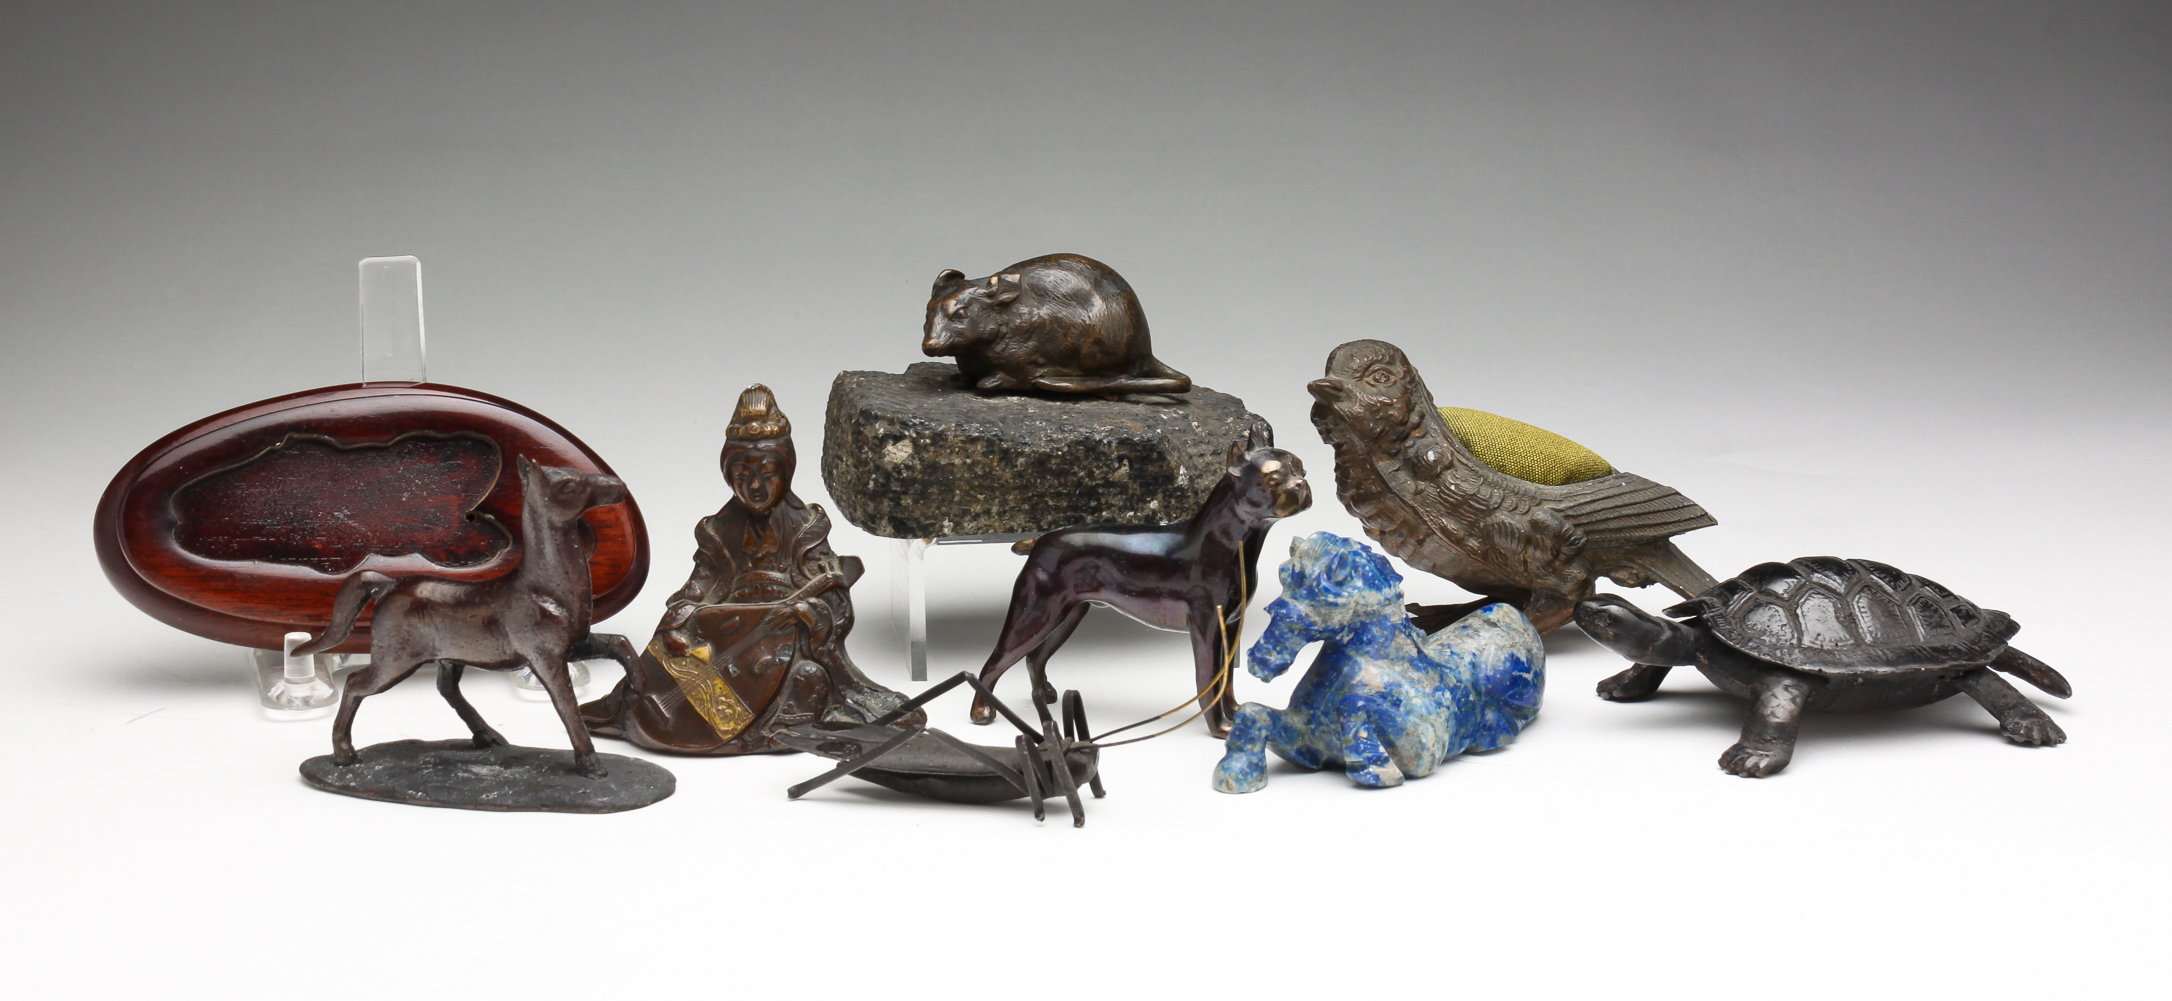 GROUP OF SMALL FIGURINES. American,